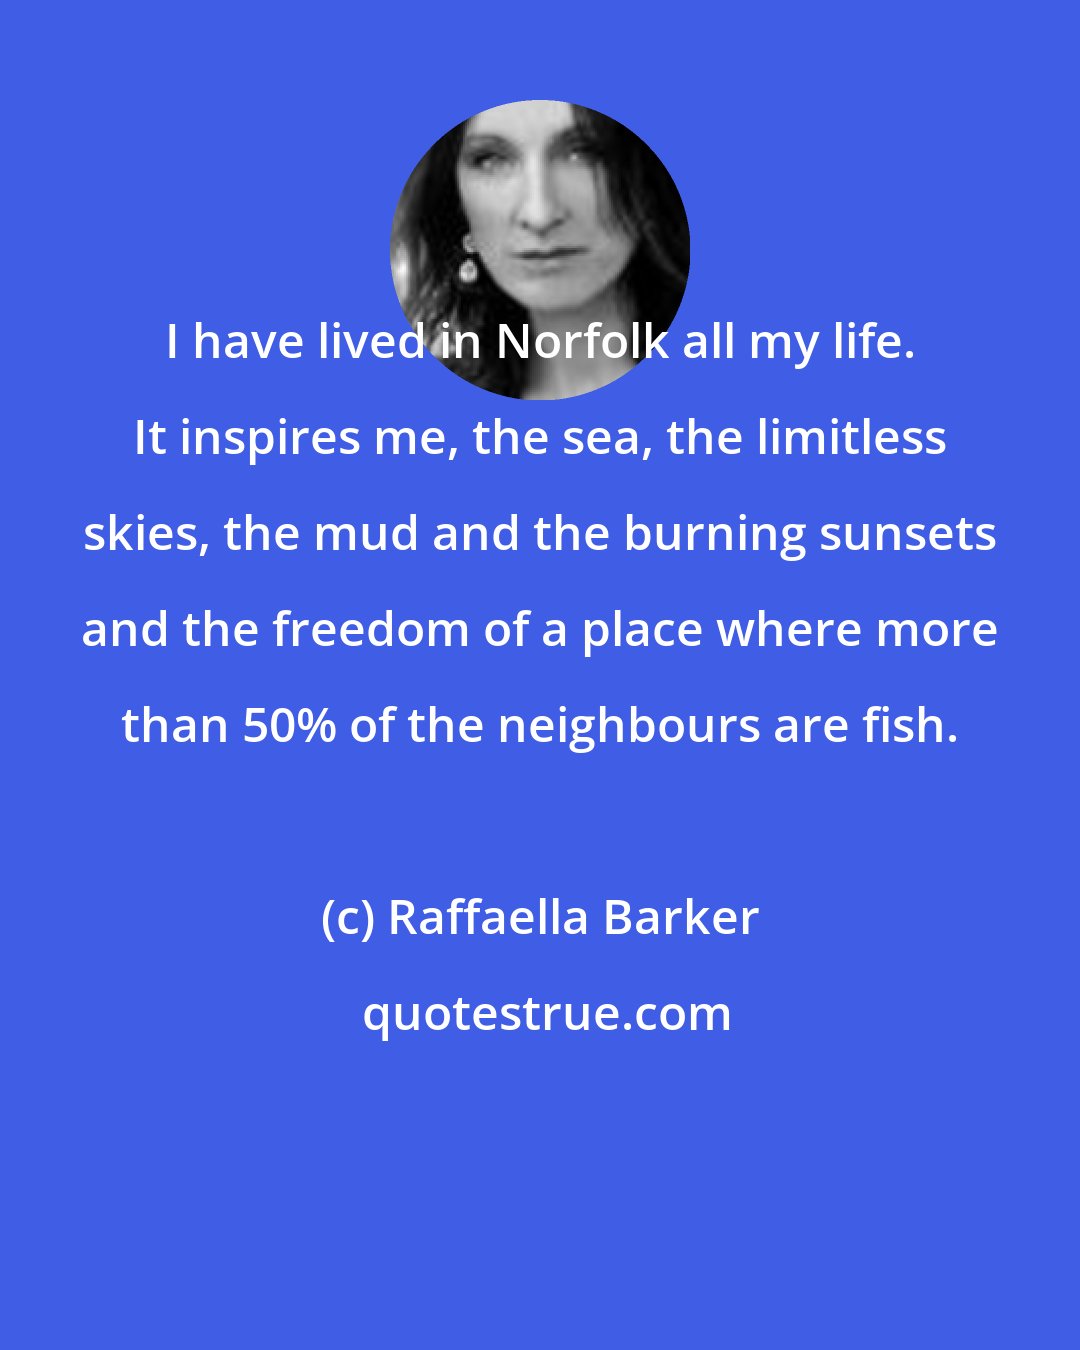 Raffaella Barker: I have lived in Norfolk all my life. It inspires me, the sea, the limitless skies, the mud and the burning sunsets and the freedom of a place where more than 50% of the neighbours are fish.